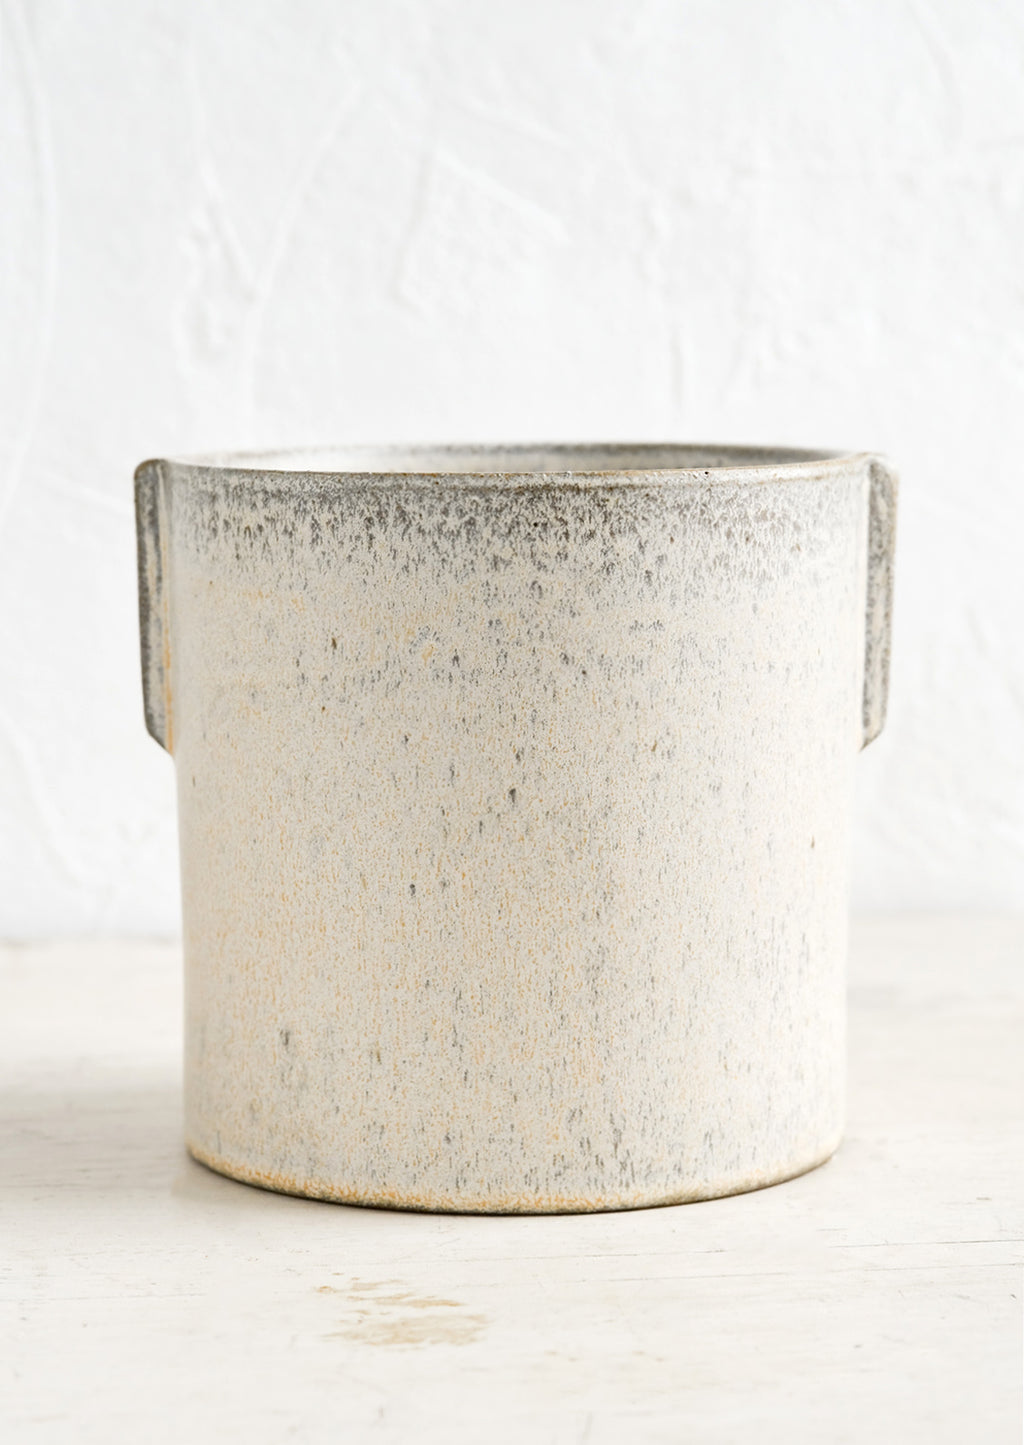 2: A neutral, speckled ceramic round planter with raised detailing at sides.